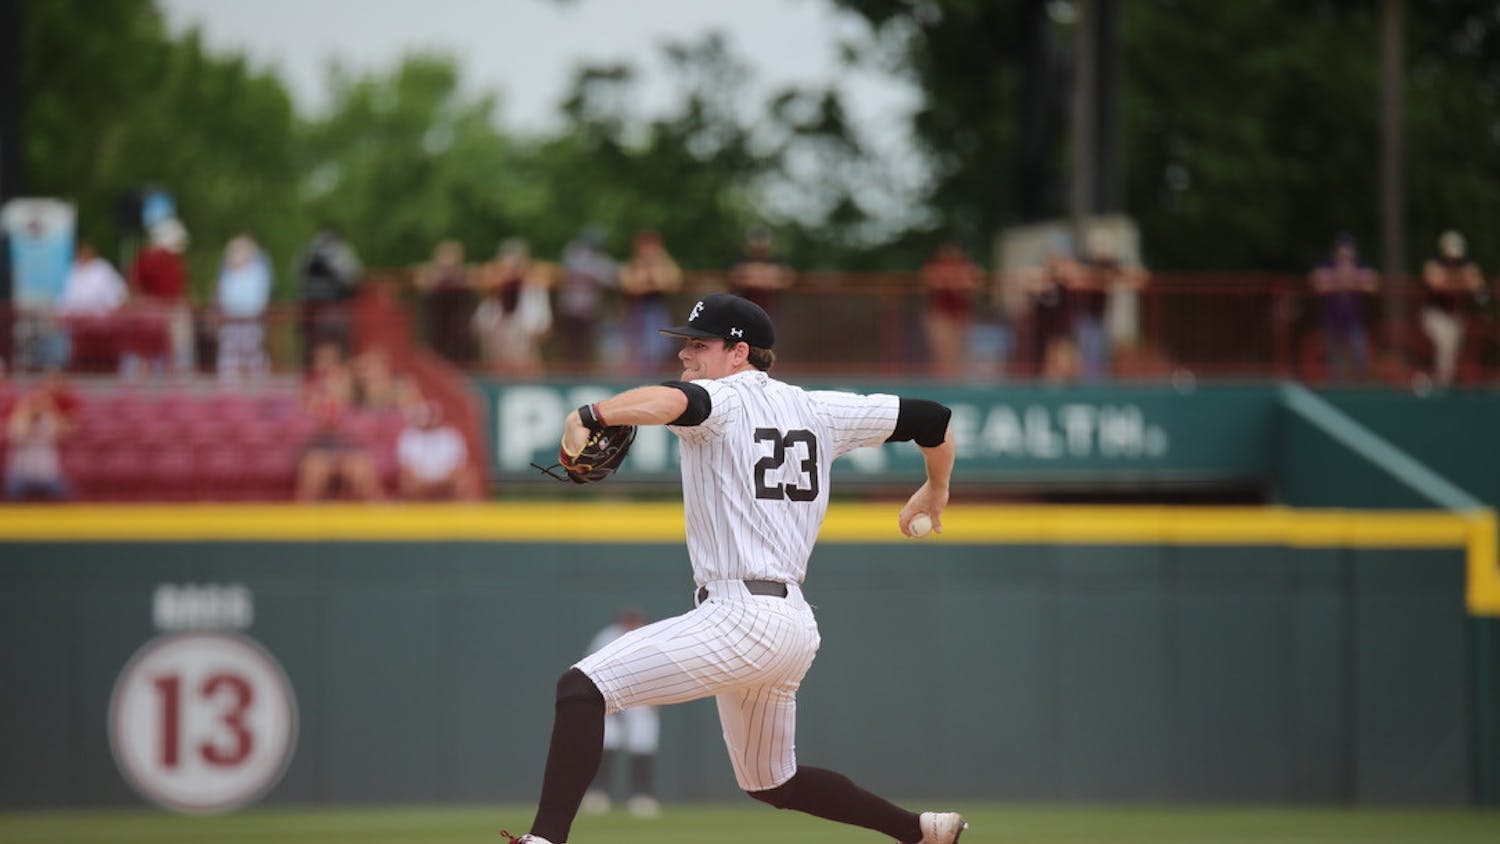 Junior pitcher Jack Mahoney started for South Carolina in the series' second game on April 7, 2023. The game was Mahoney's eighth start of 2023 after undergoing Tommy John surgery and not pitching in 2022.